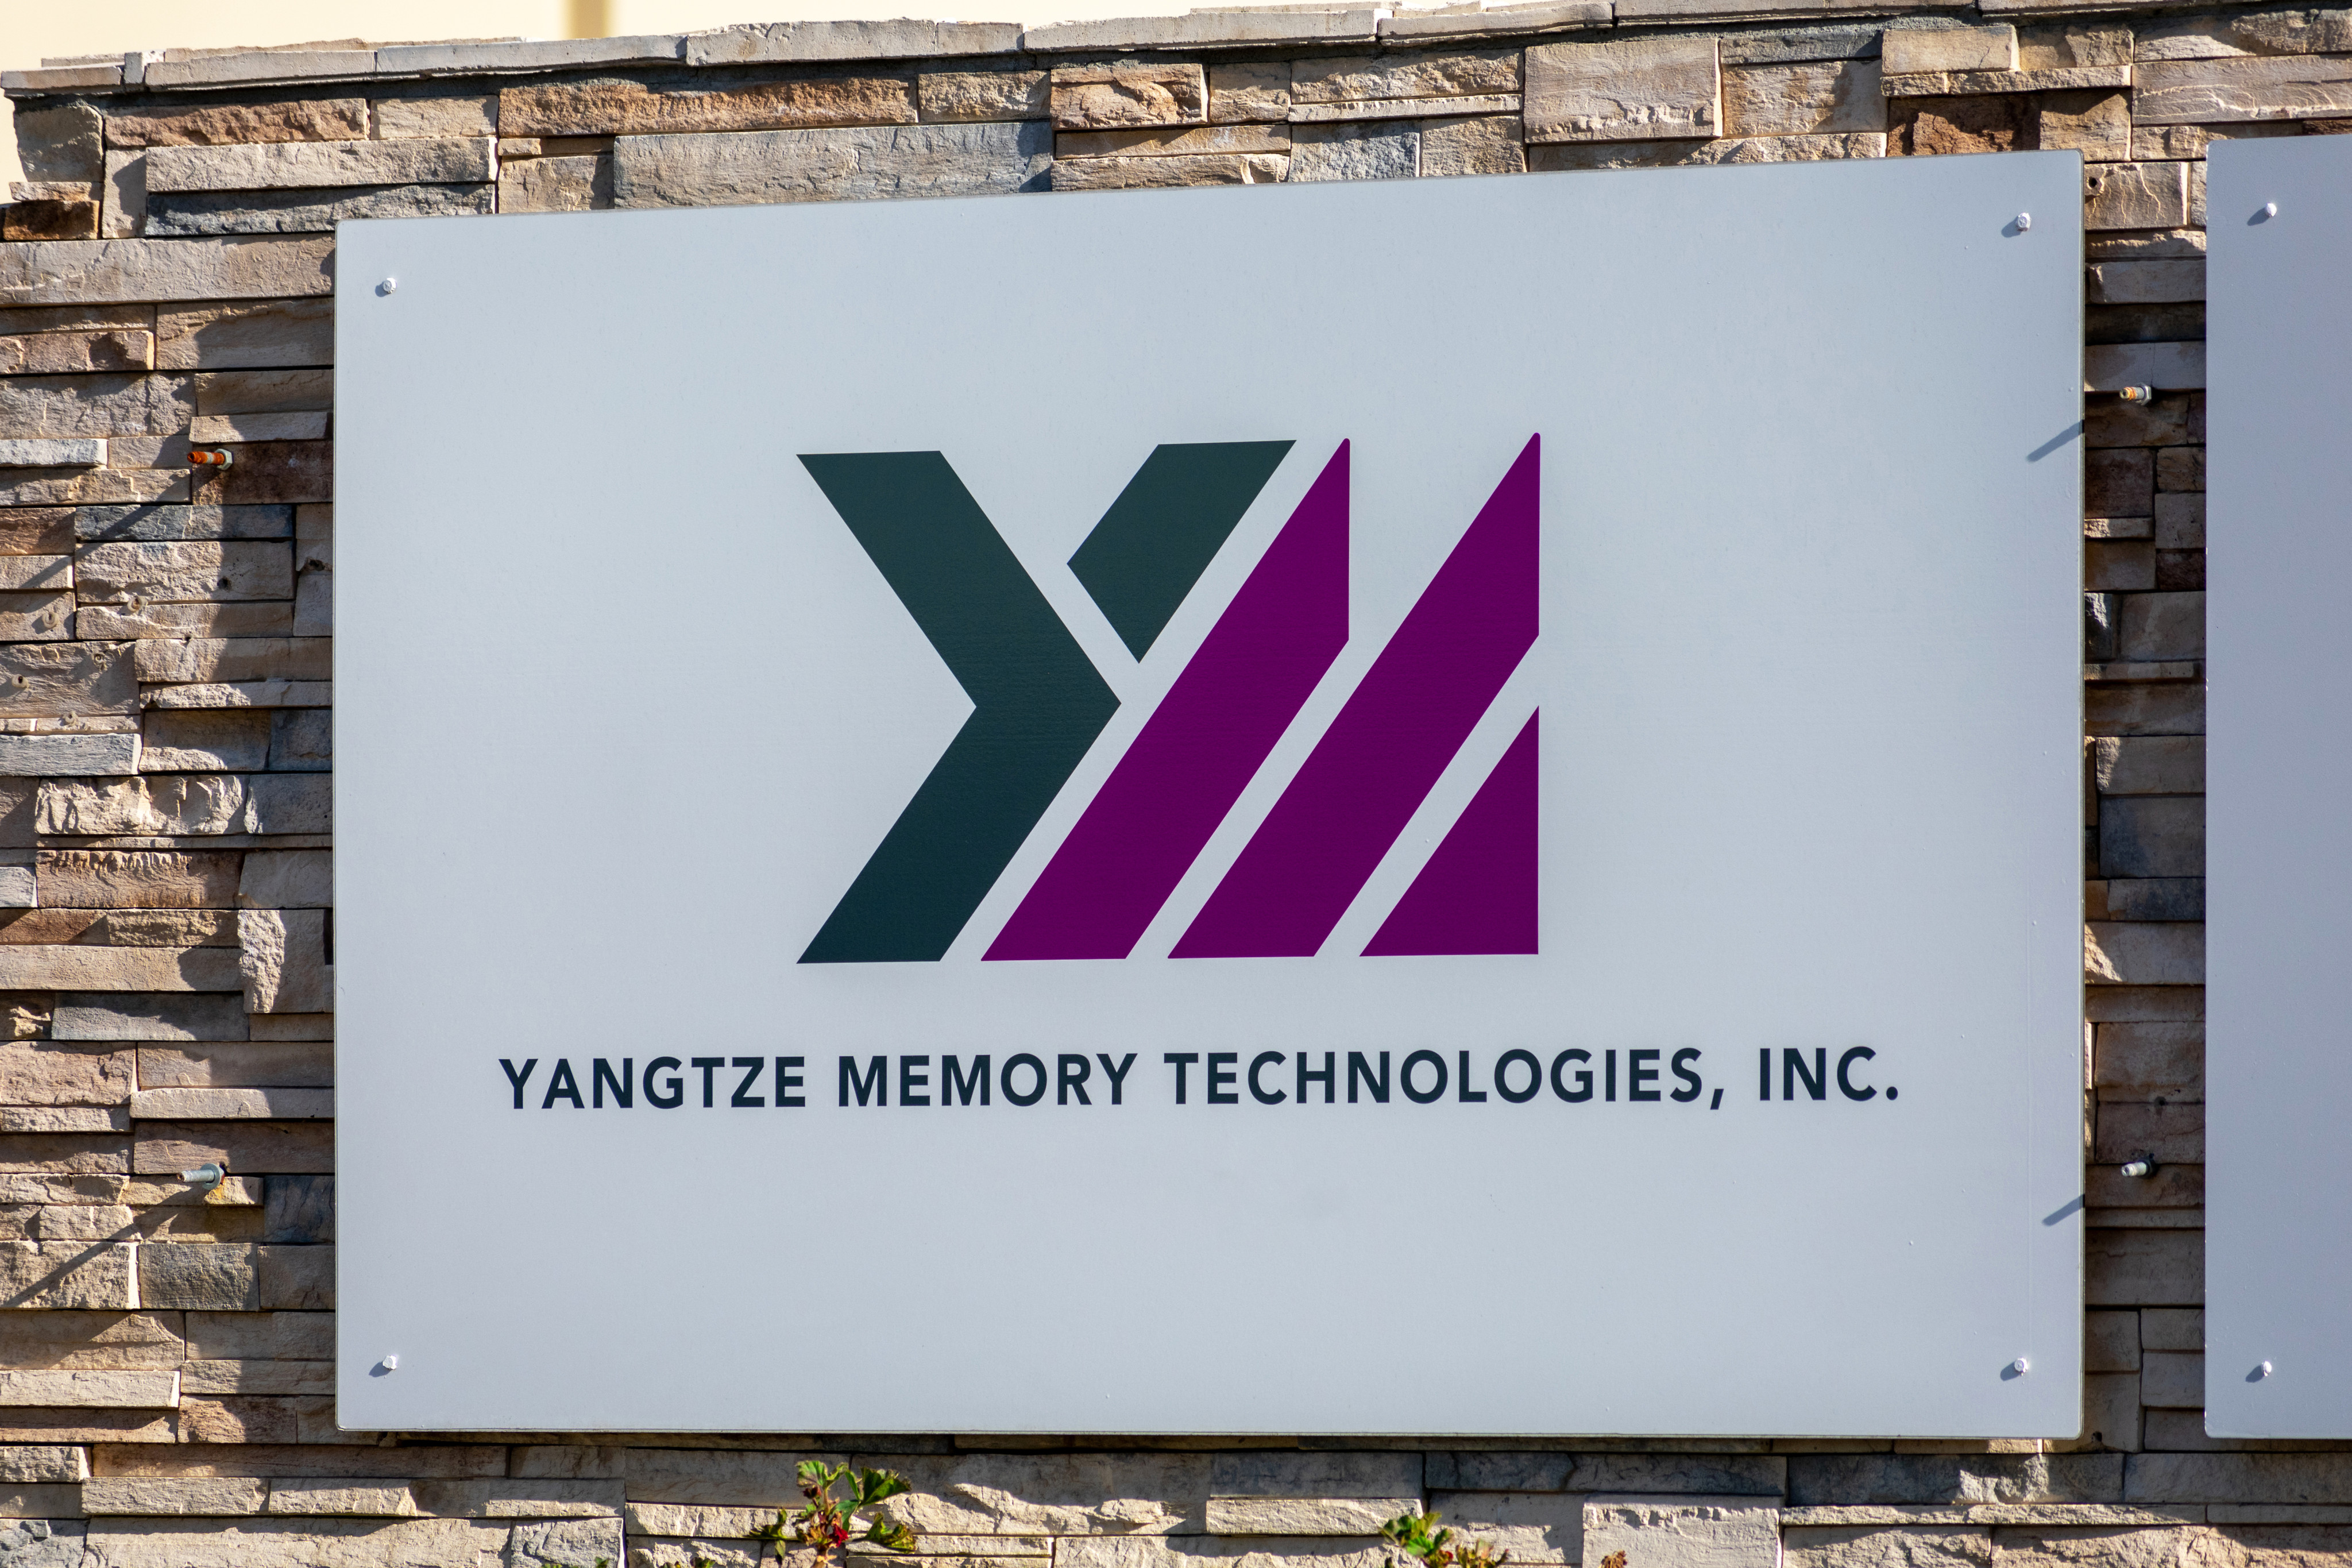 A sign at the Silicon Valley office of YMTC in San Jose, California. Photo: Shutterstock